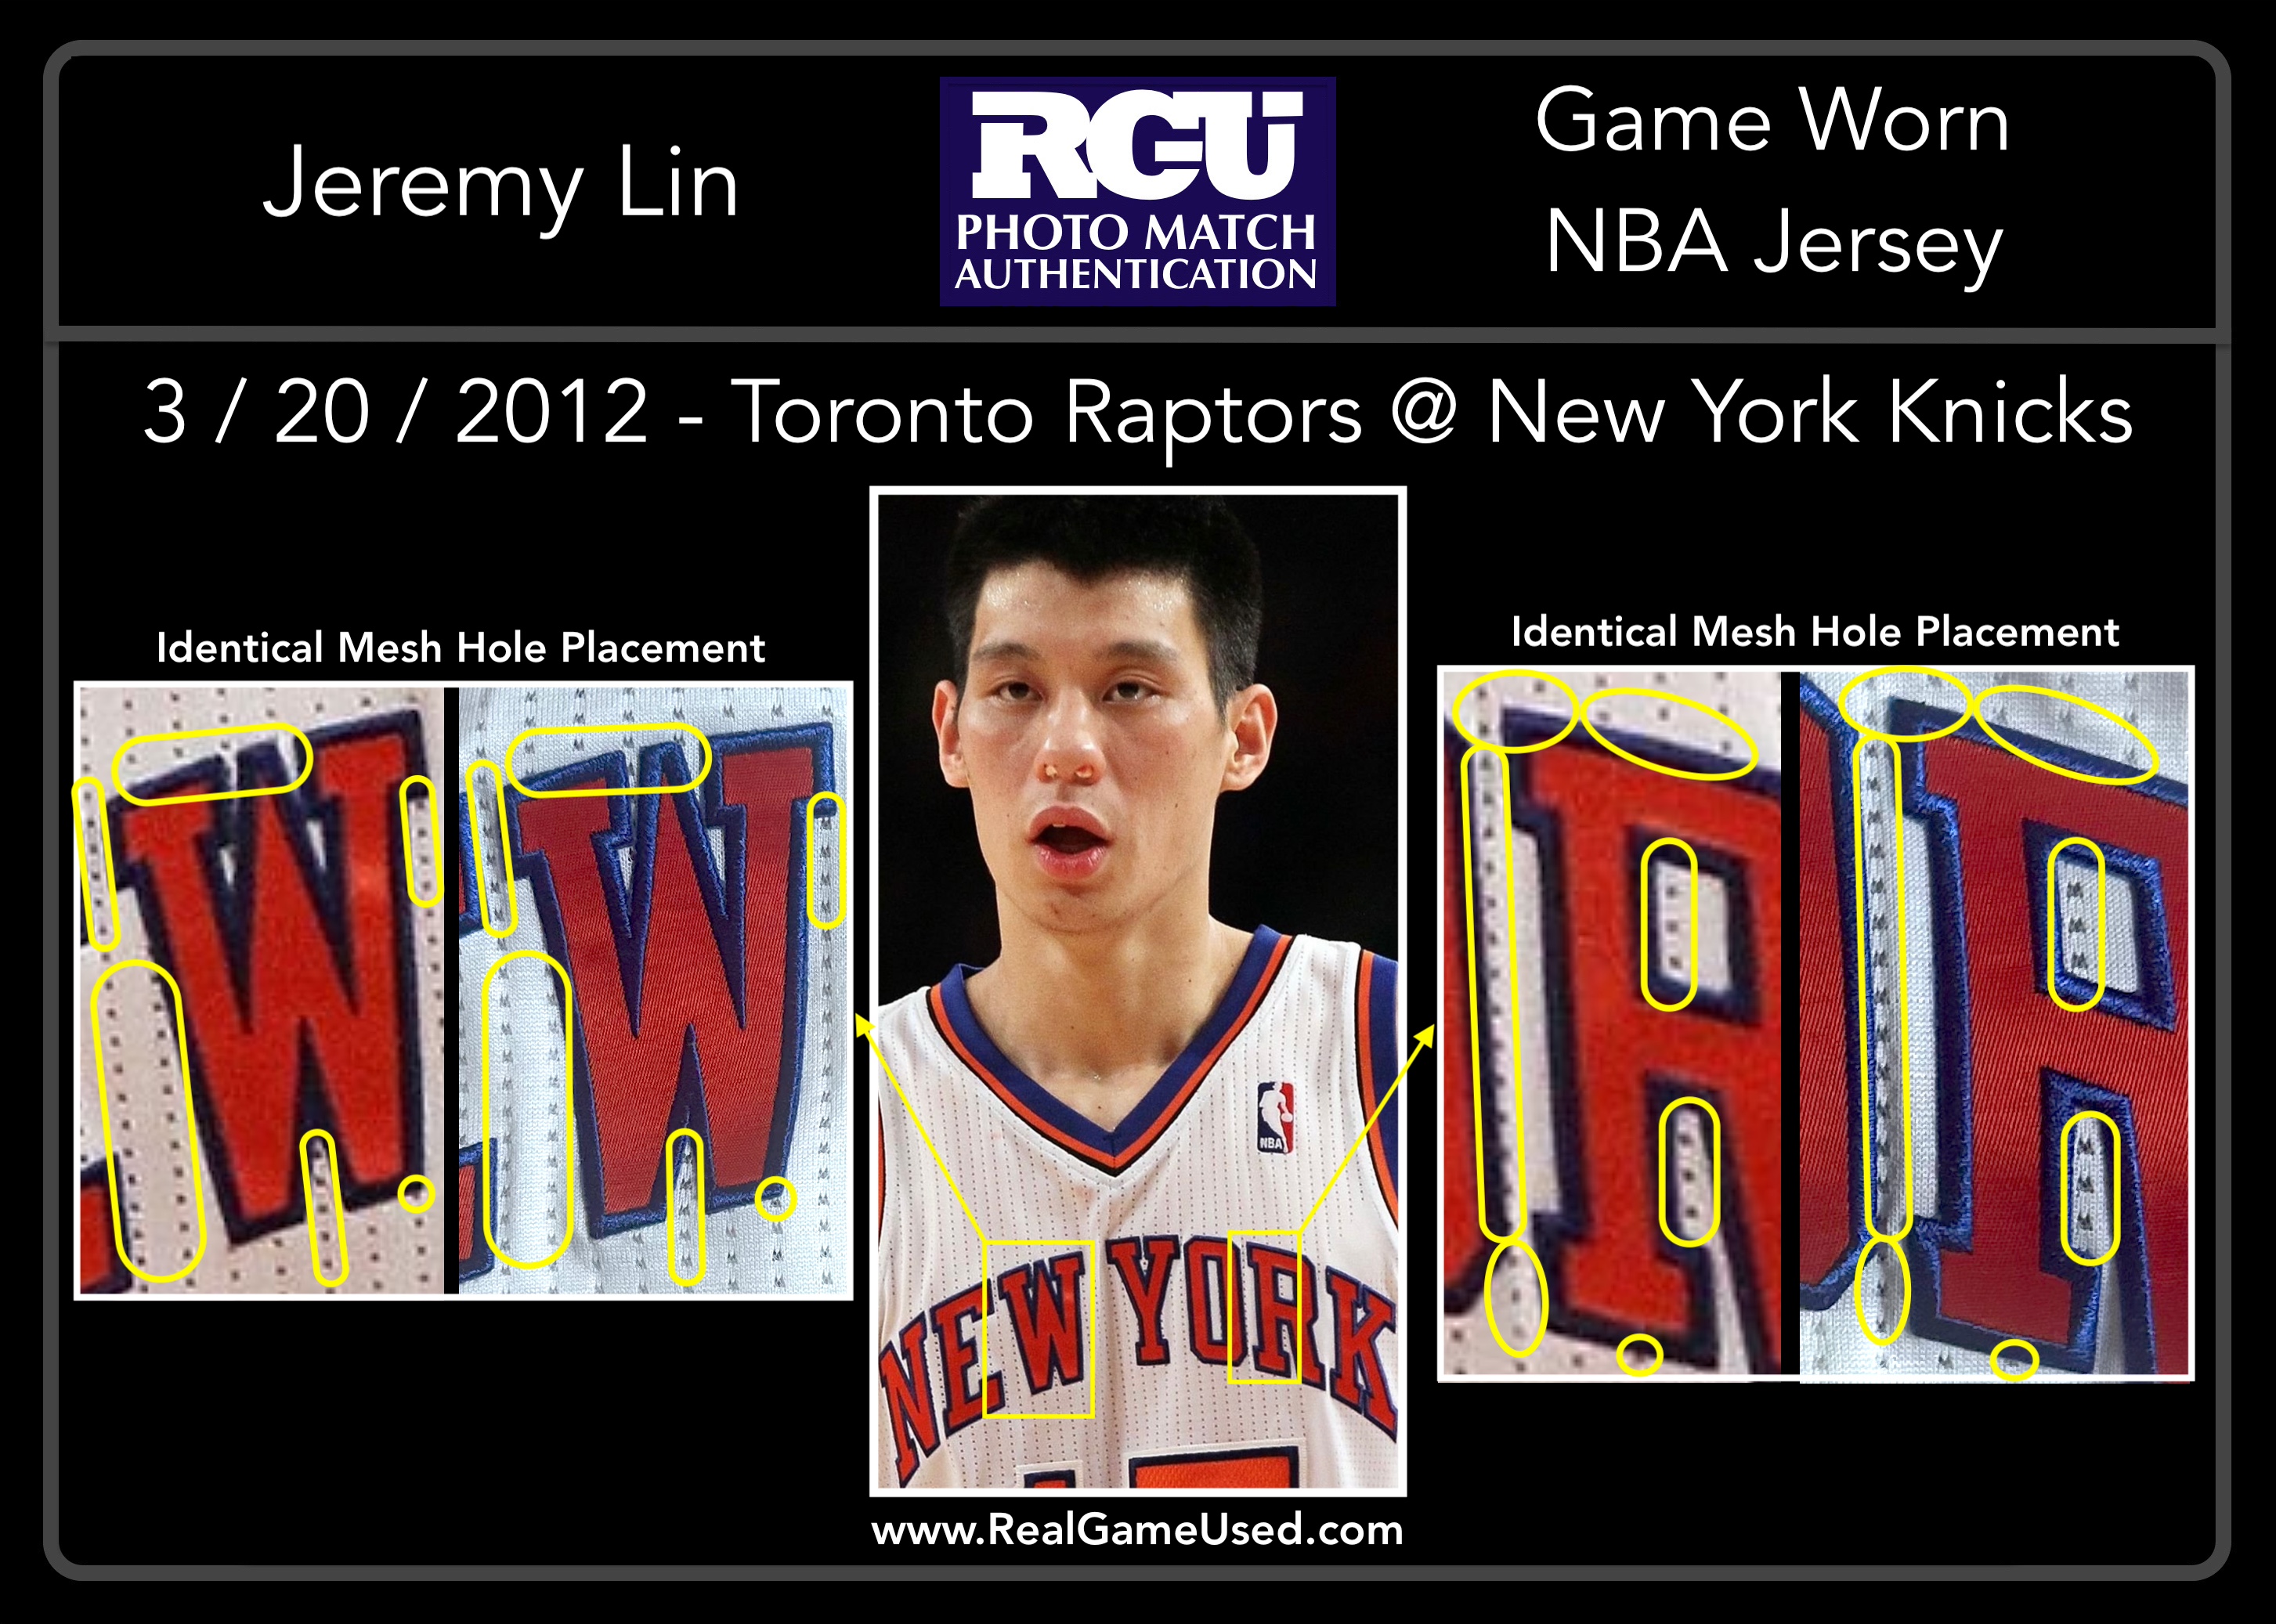 Lot Detail - Jeremy Lin 2011-12 New York Knicks PHOTO MATCHED Game Worn  Jersey - LinSanity Era - LAST GAME AS A KNICK! - 2 Games (RGU)